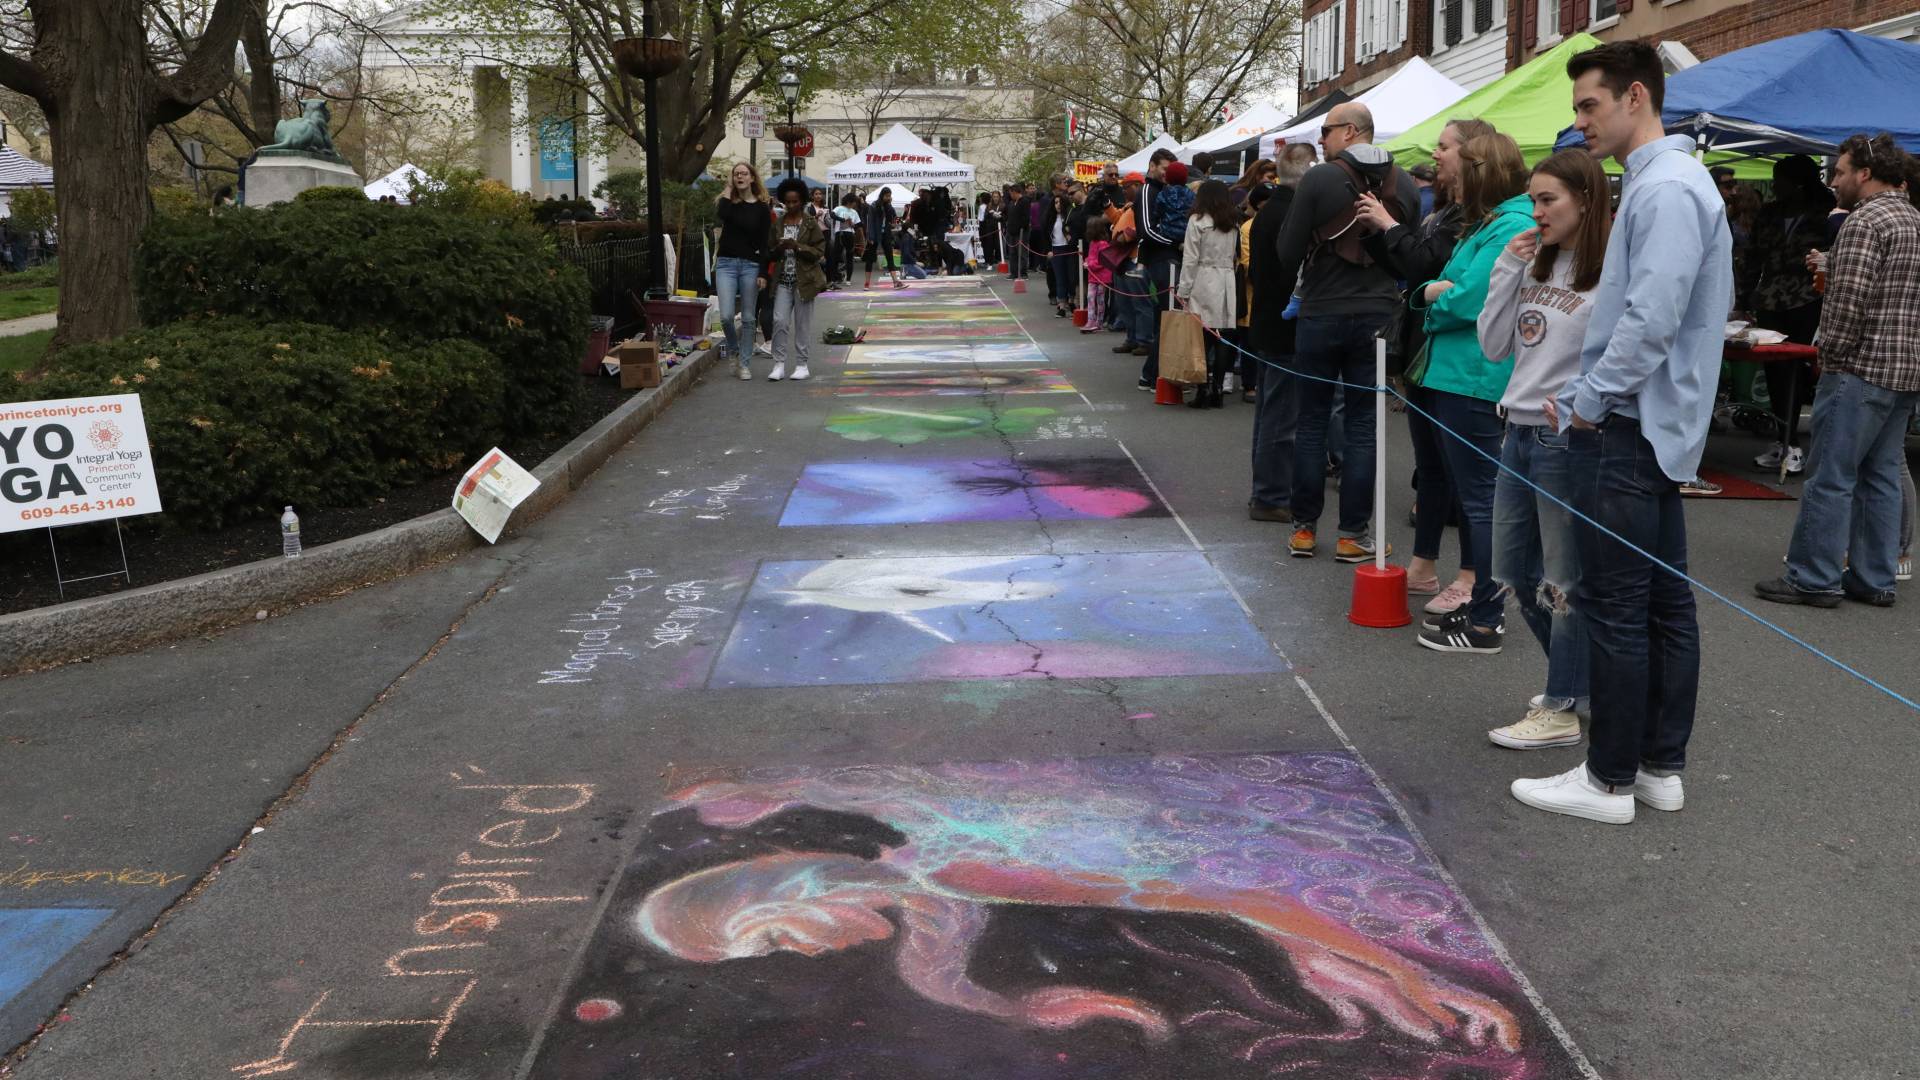  Chalk art on the street during the Communiversity "typeof =" foaf: Image "/></div><figcaption
class=